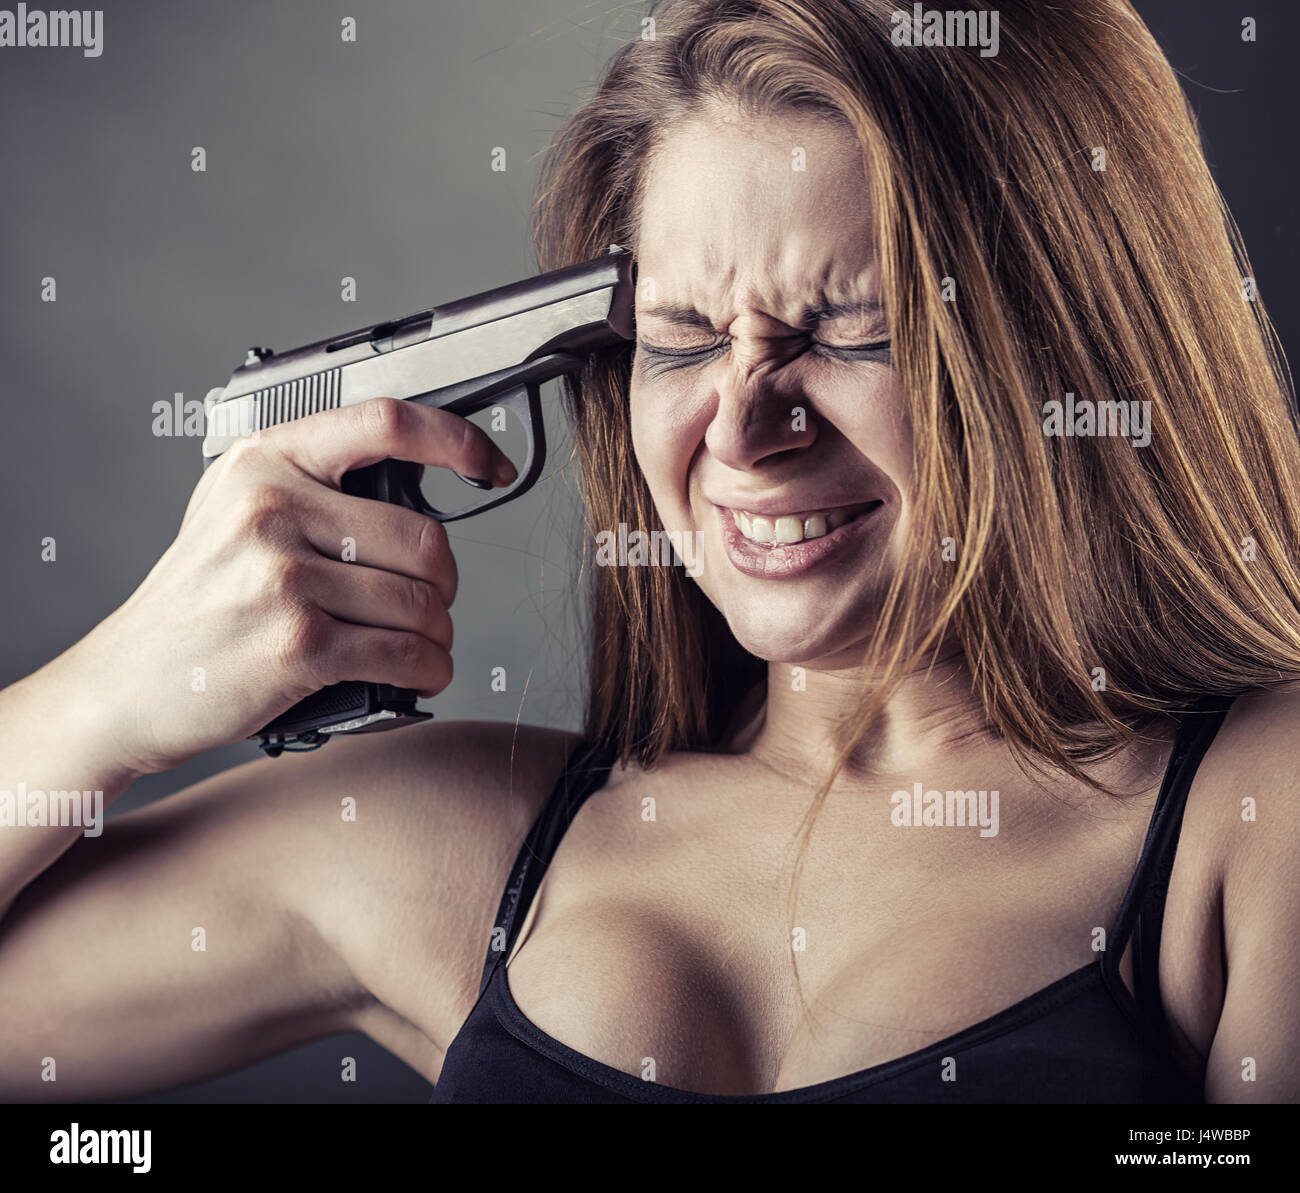 woman-with-pistol-pointing-on-her-head-J4WBBP.jpg